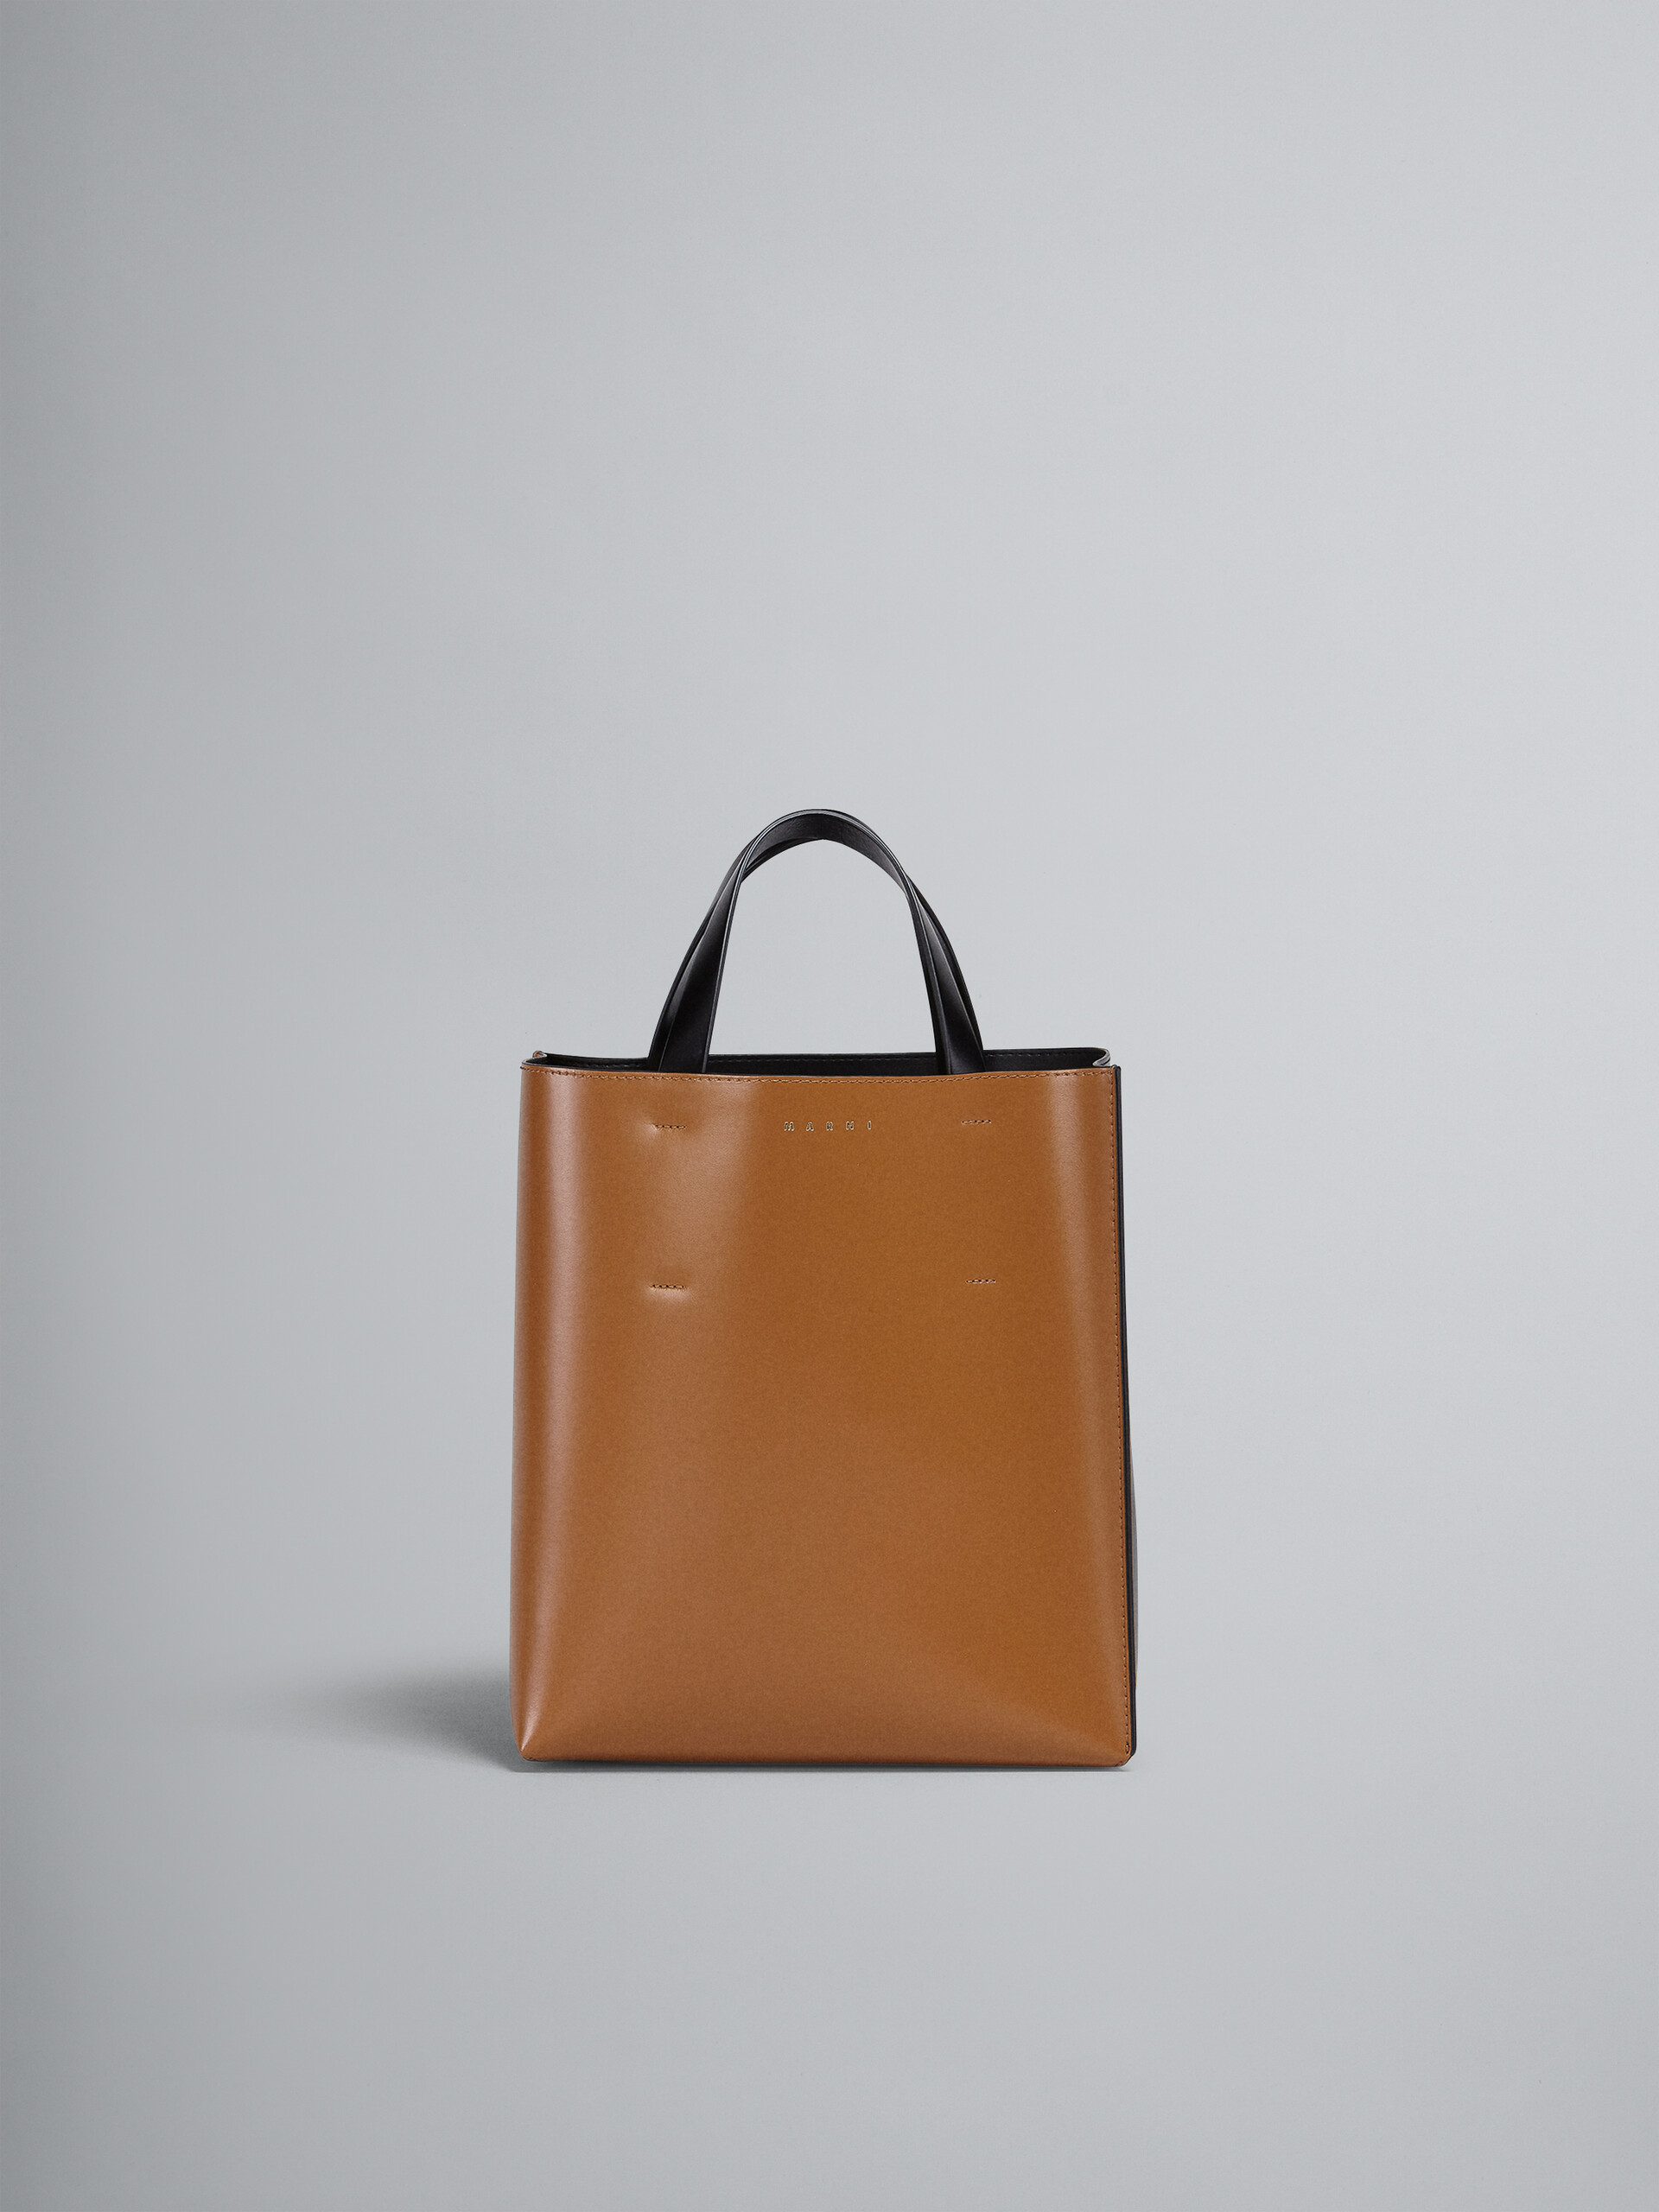 White and black calf leather small MUSEO tote bag - Shopping Bags - Image 1